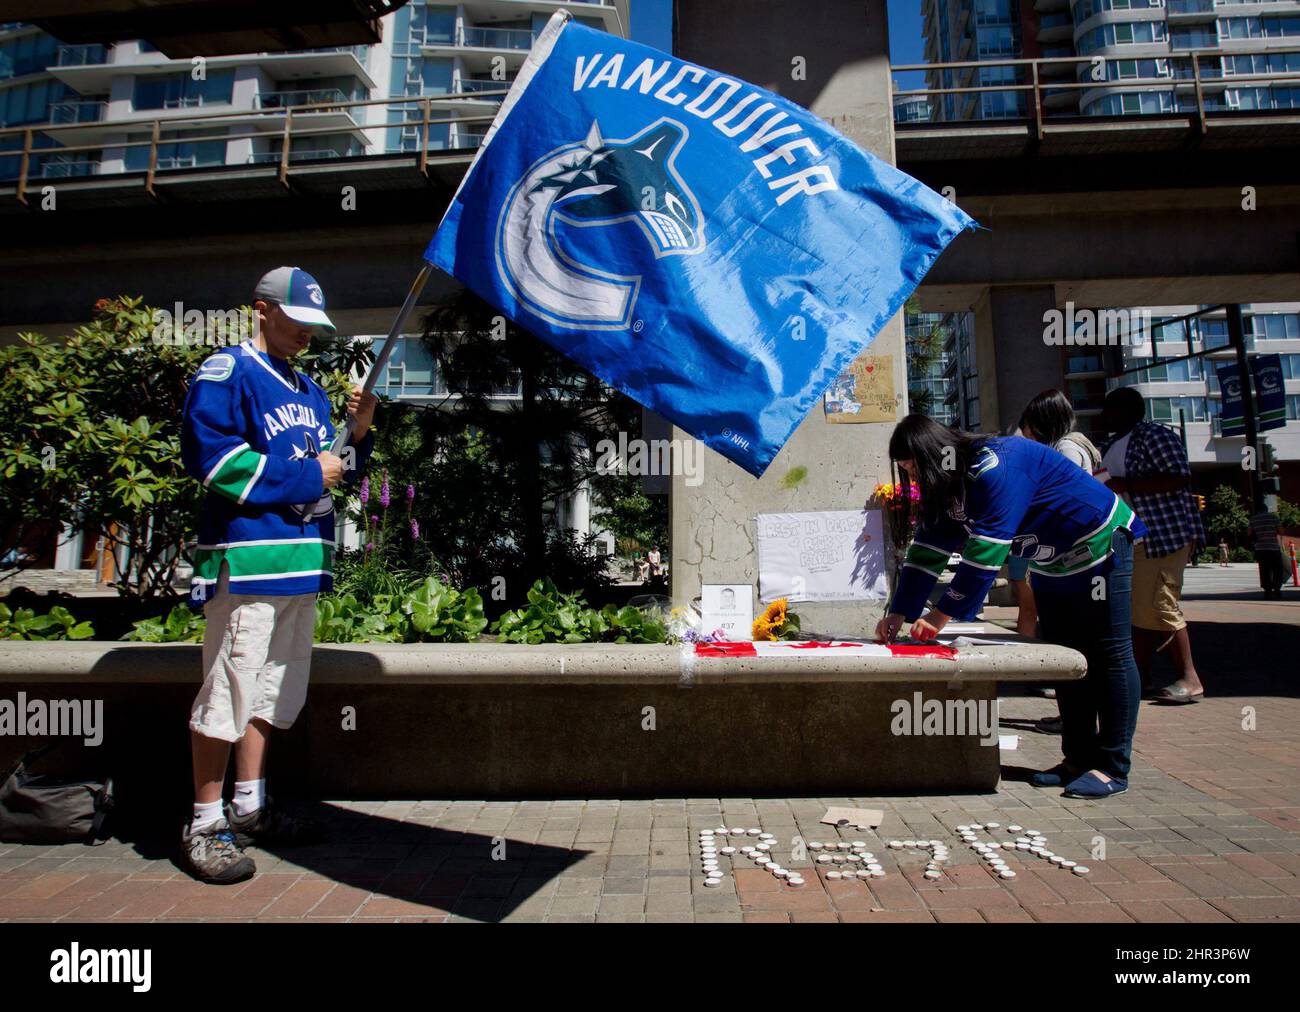 Calvin Ng, left, holds a Vancouver Canucks flag as Heidi Mak, right, leaves a message at a makeshift memorial for former Canucks hockey player Rick Rypien outside Rogers Arena in Vancouver, B.C., on Tuesday August 16, 2011. Rypien, who signed a one-year deal with the Winnipeg Jets in July, was found dead at his Alberta home on Monday. THE CANADIAN PRESS/Darryl Dyck Stock Photo